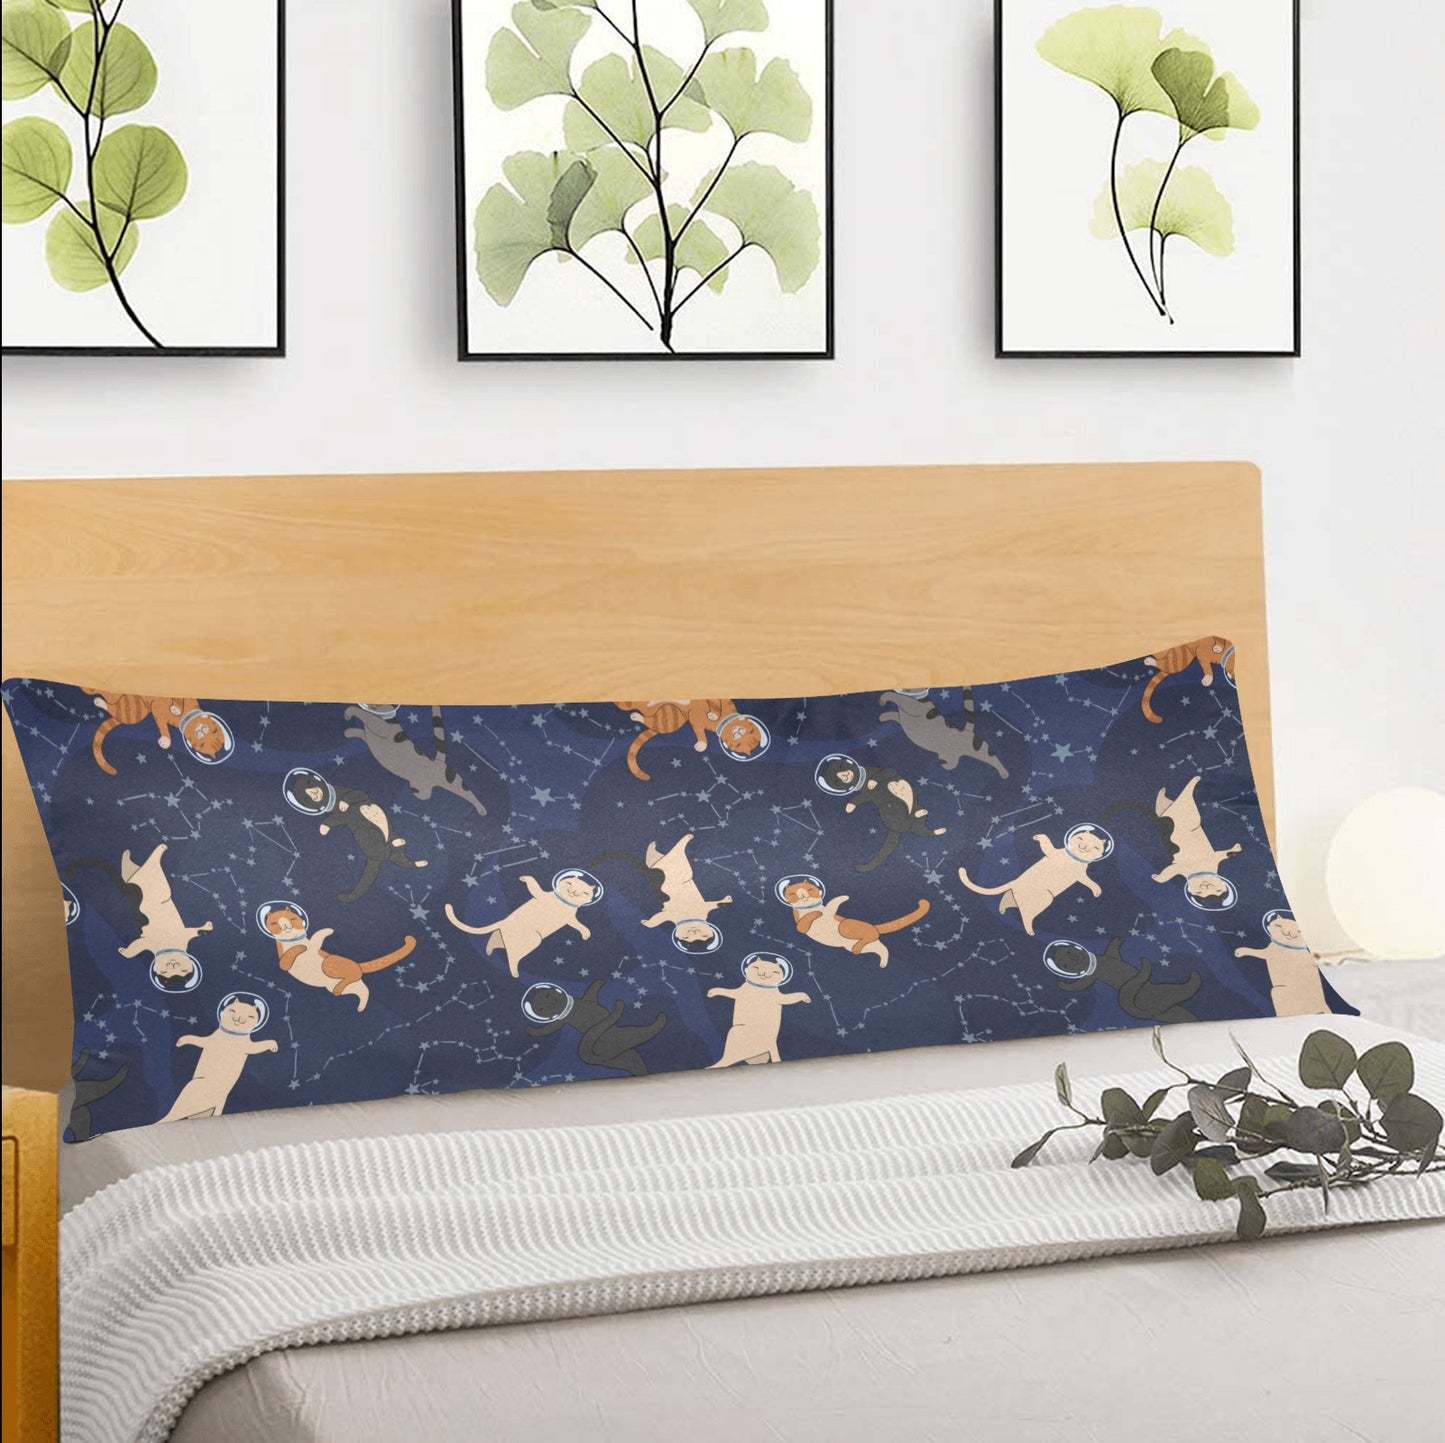 Cats Body Pillow Case, Constellation Kittens Space Blue Long Large Bed Accent Print Throw Decor Decorative Cover 20x54 Starcove Fashion